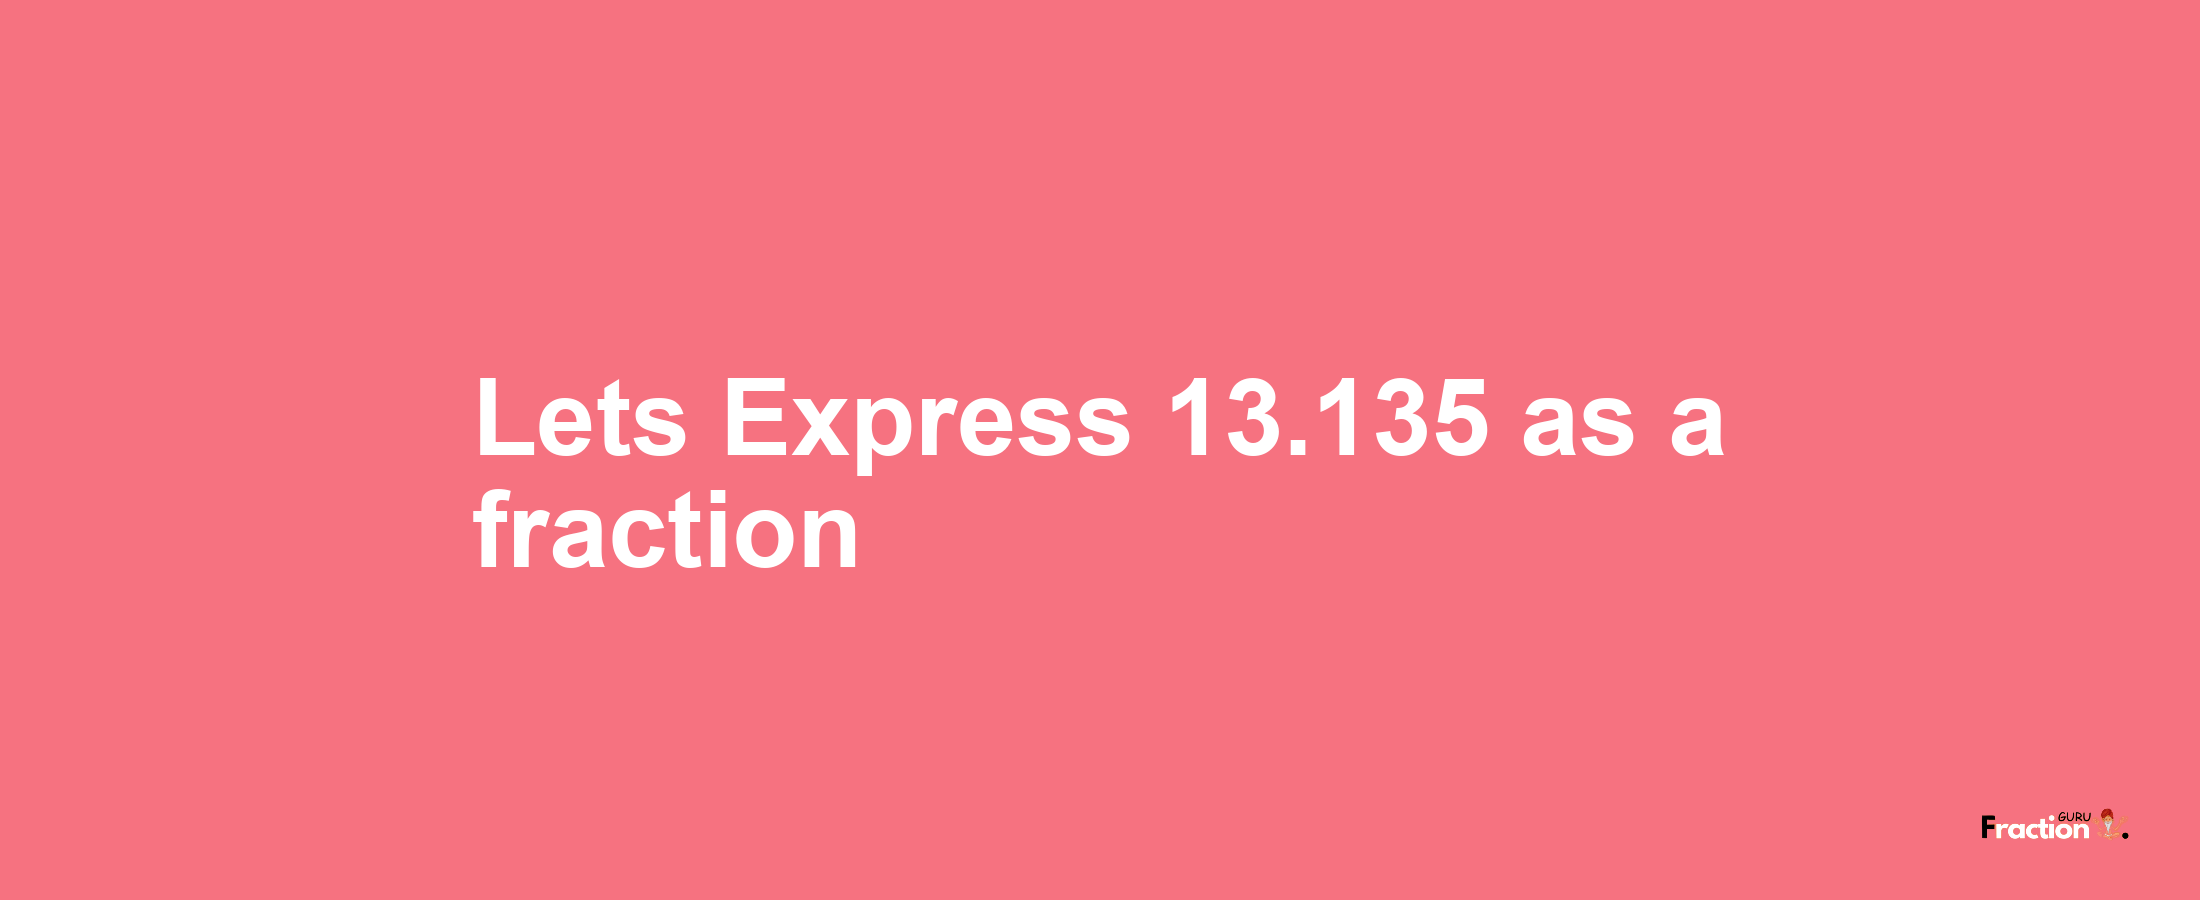 Lets Express 13.135 as afraction